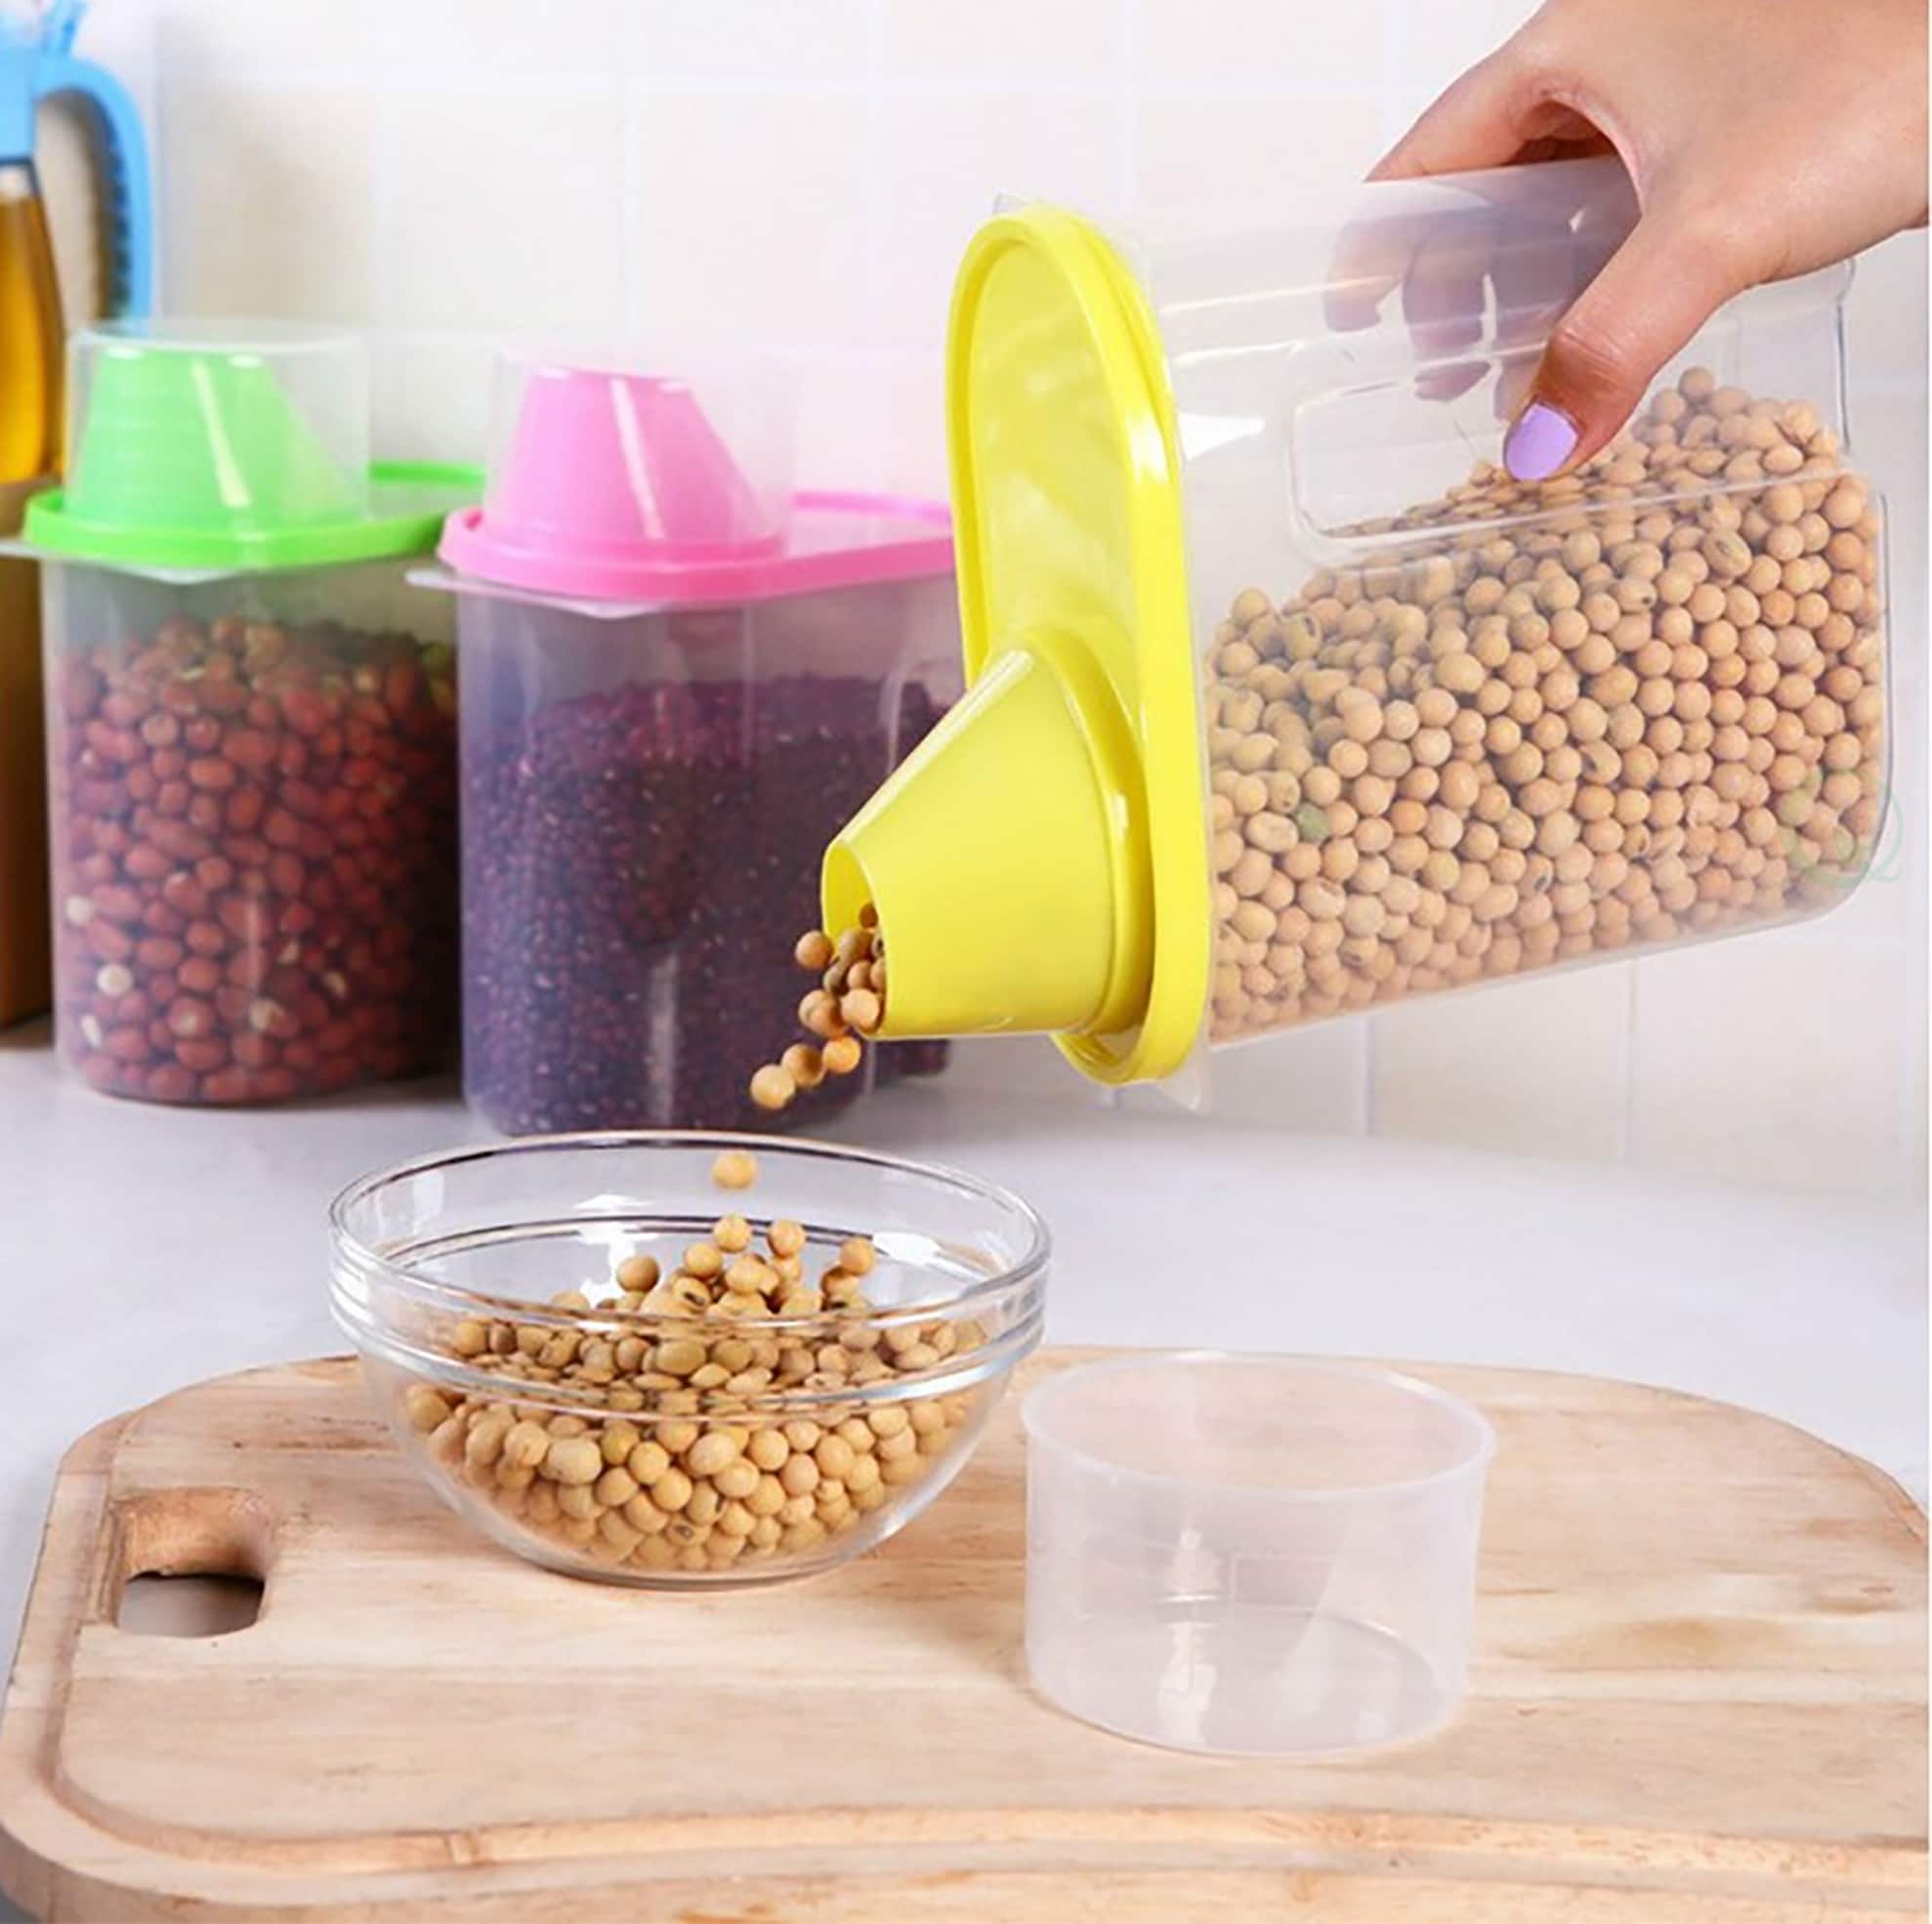 Basicwise Wide Mouth Plastic BPA-Free Reusable Rice Dispenser